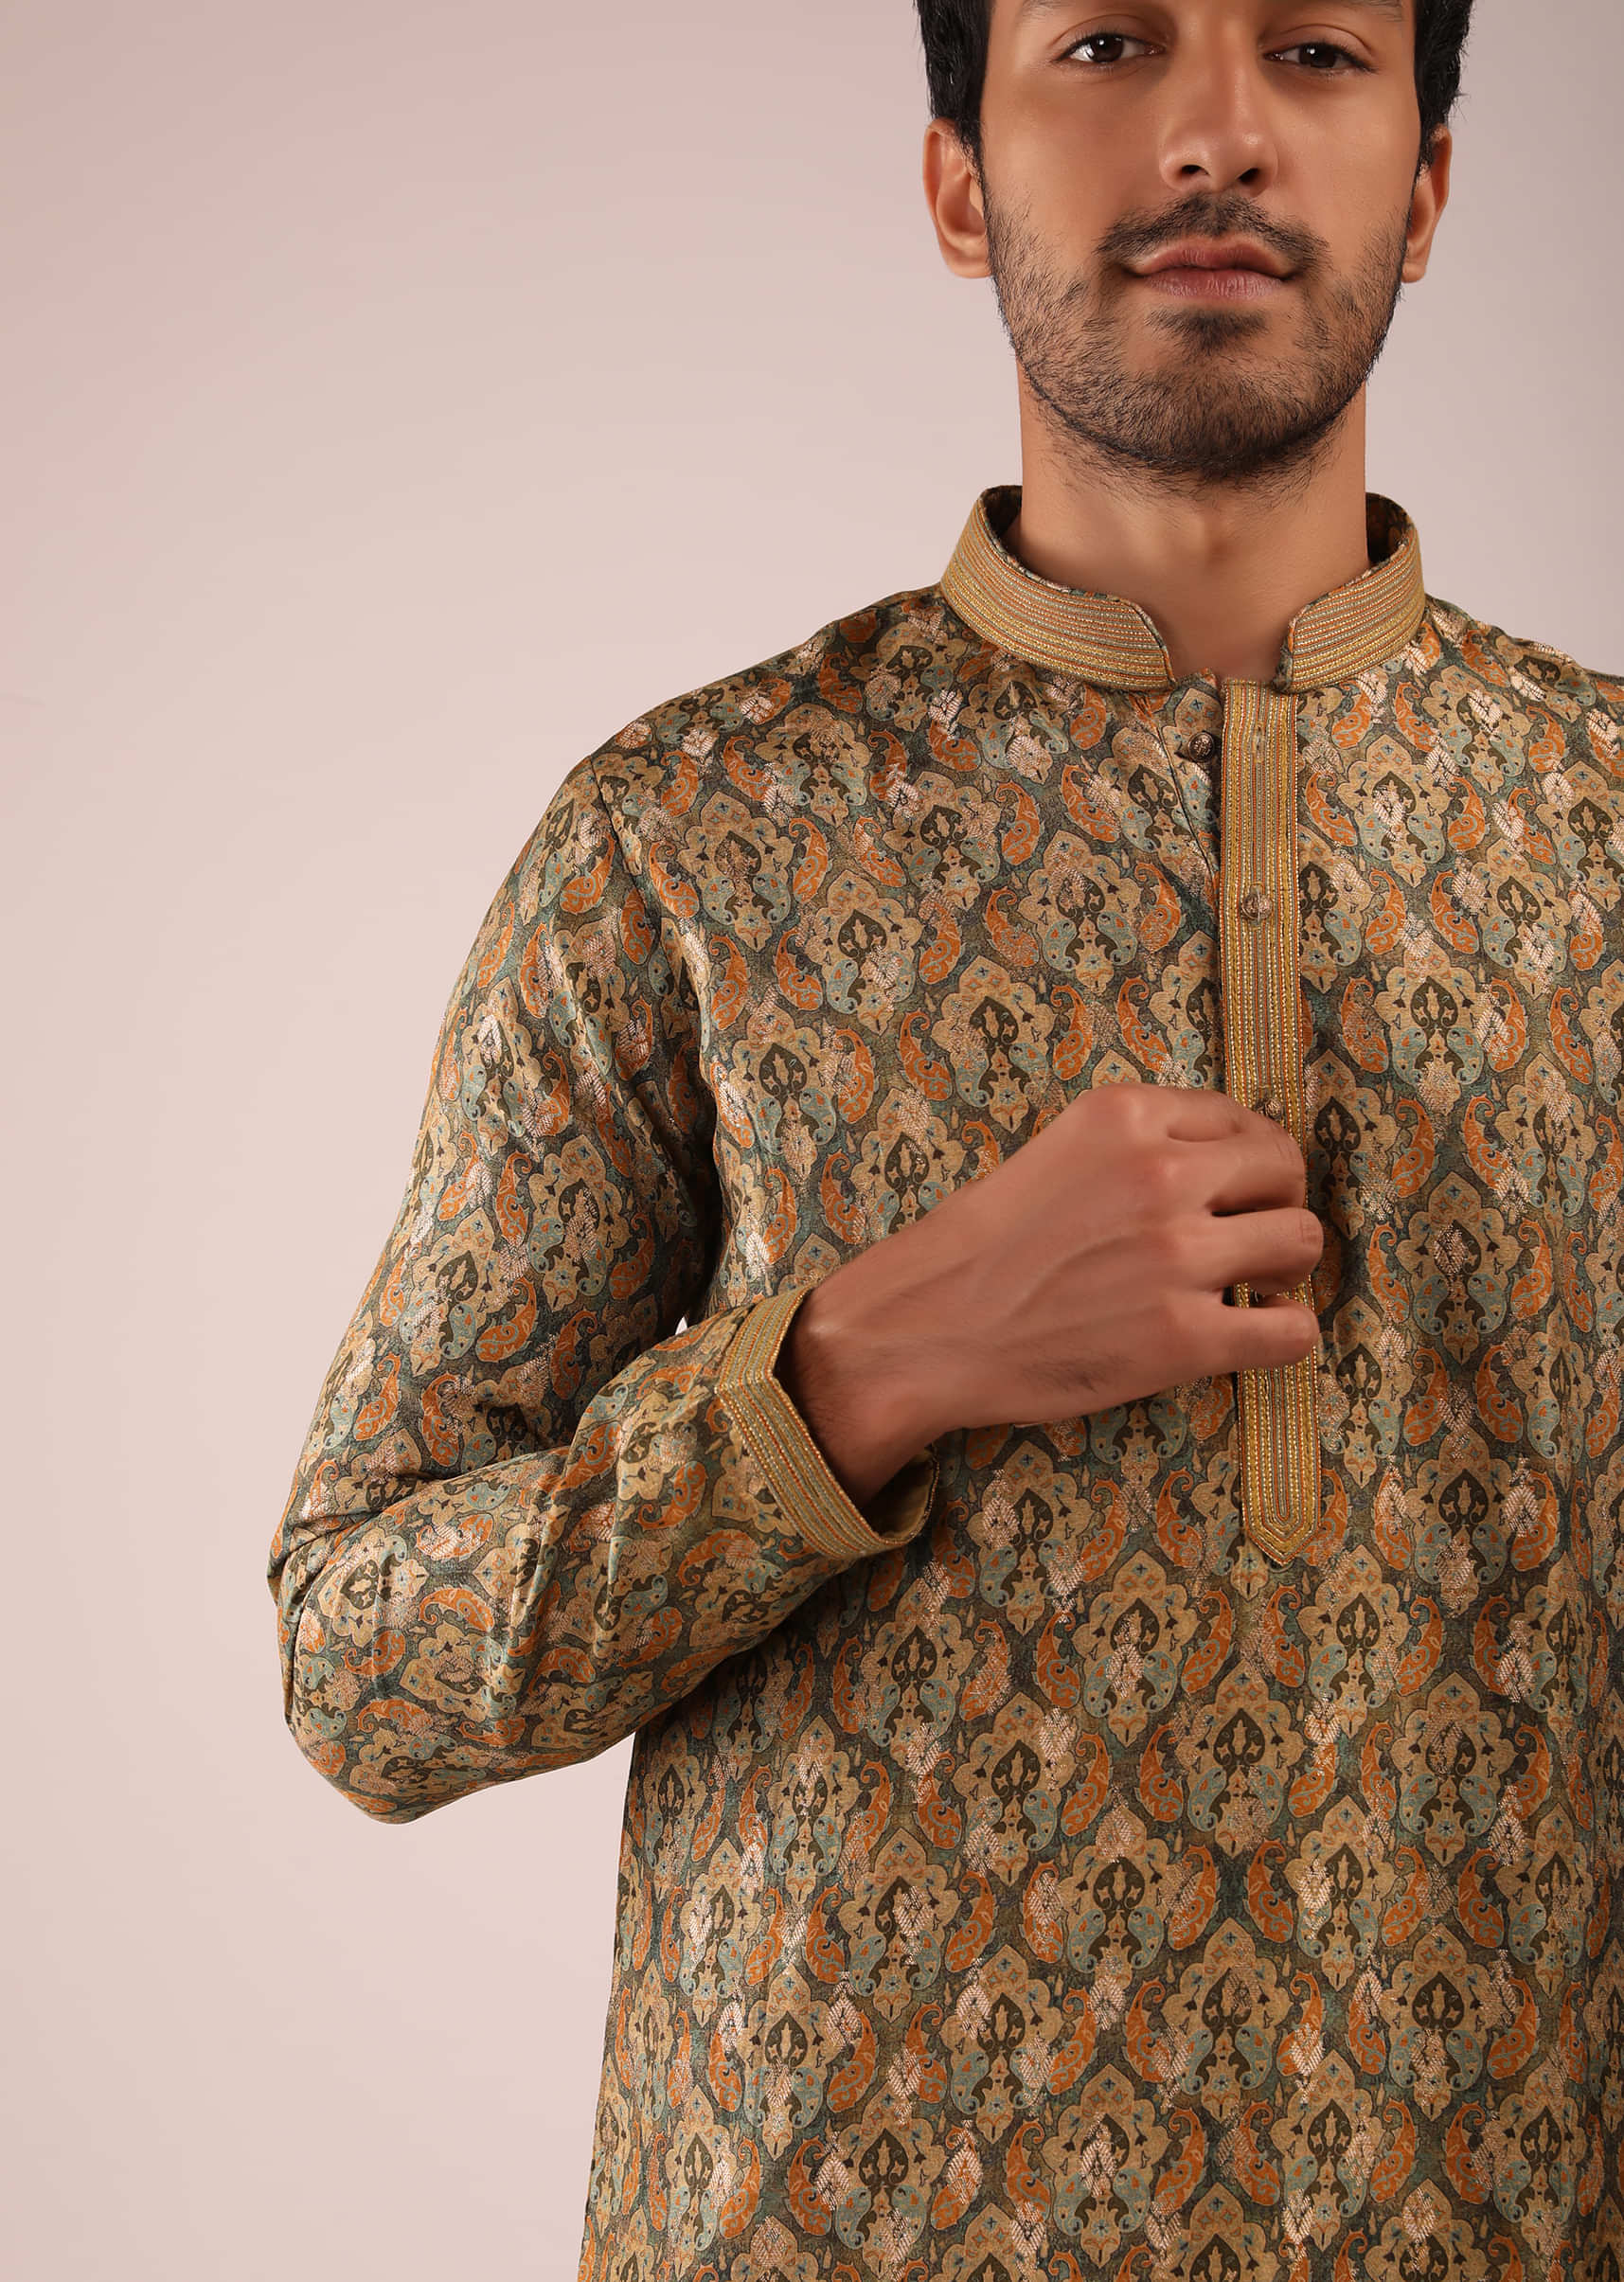 Gothic Olive Kurta Set In Brocade Silk With Earthy Colored Block Printed Moroccan Jaal